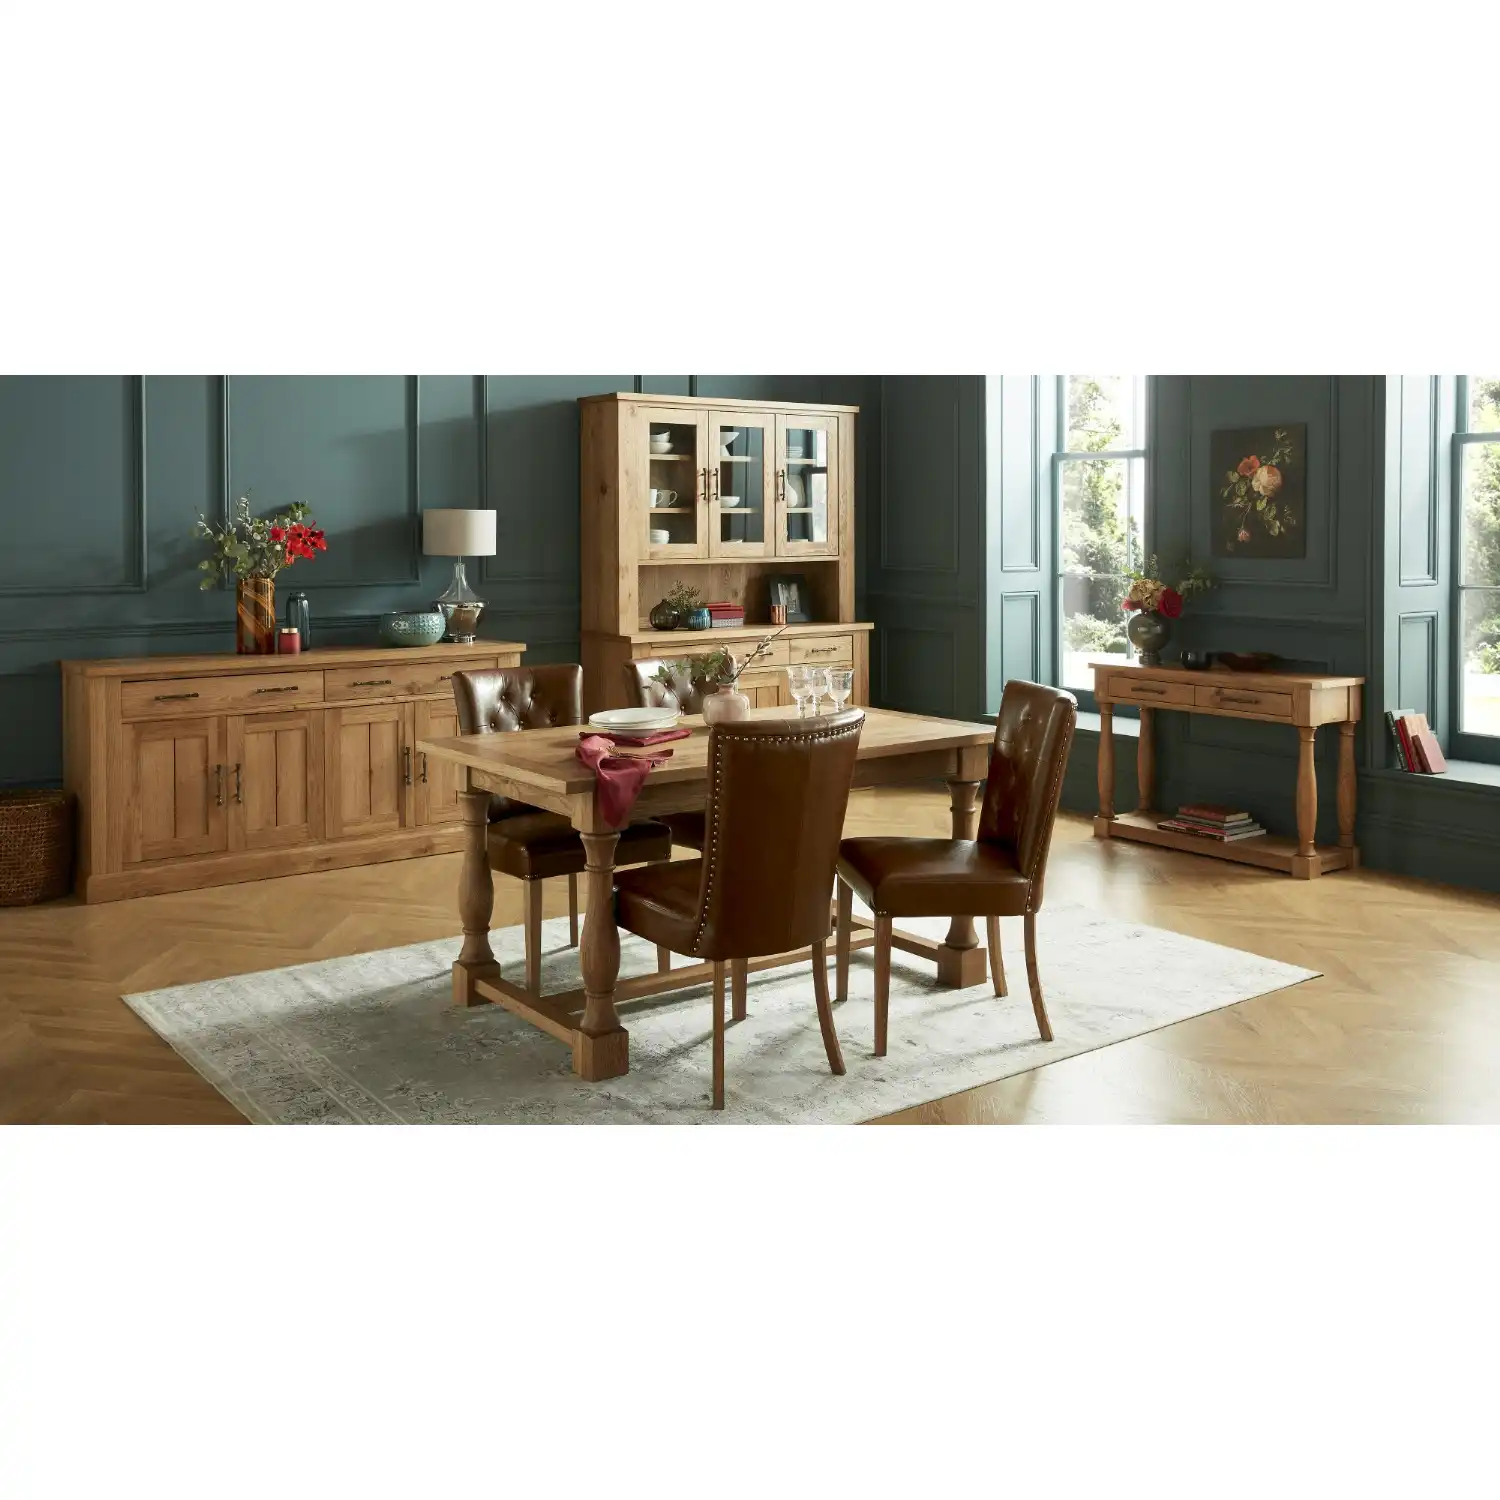 Rustic Oak Extending Dining Table Set 4 Tan Leather Chairs